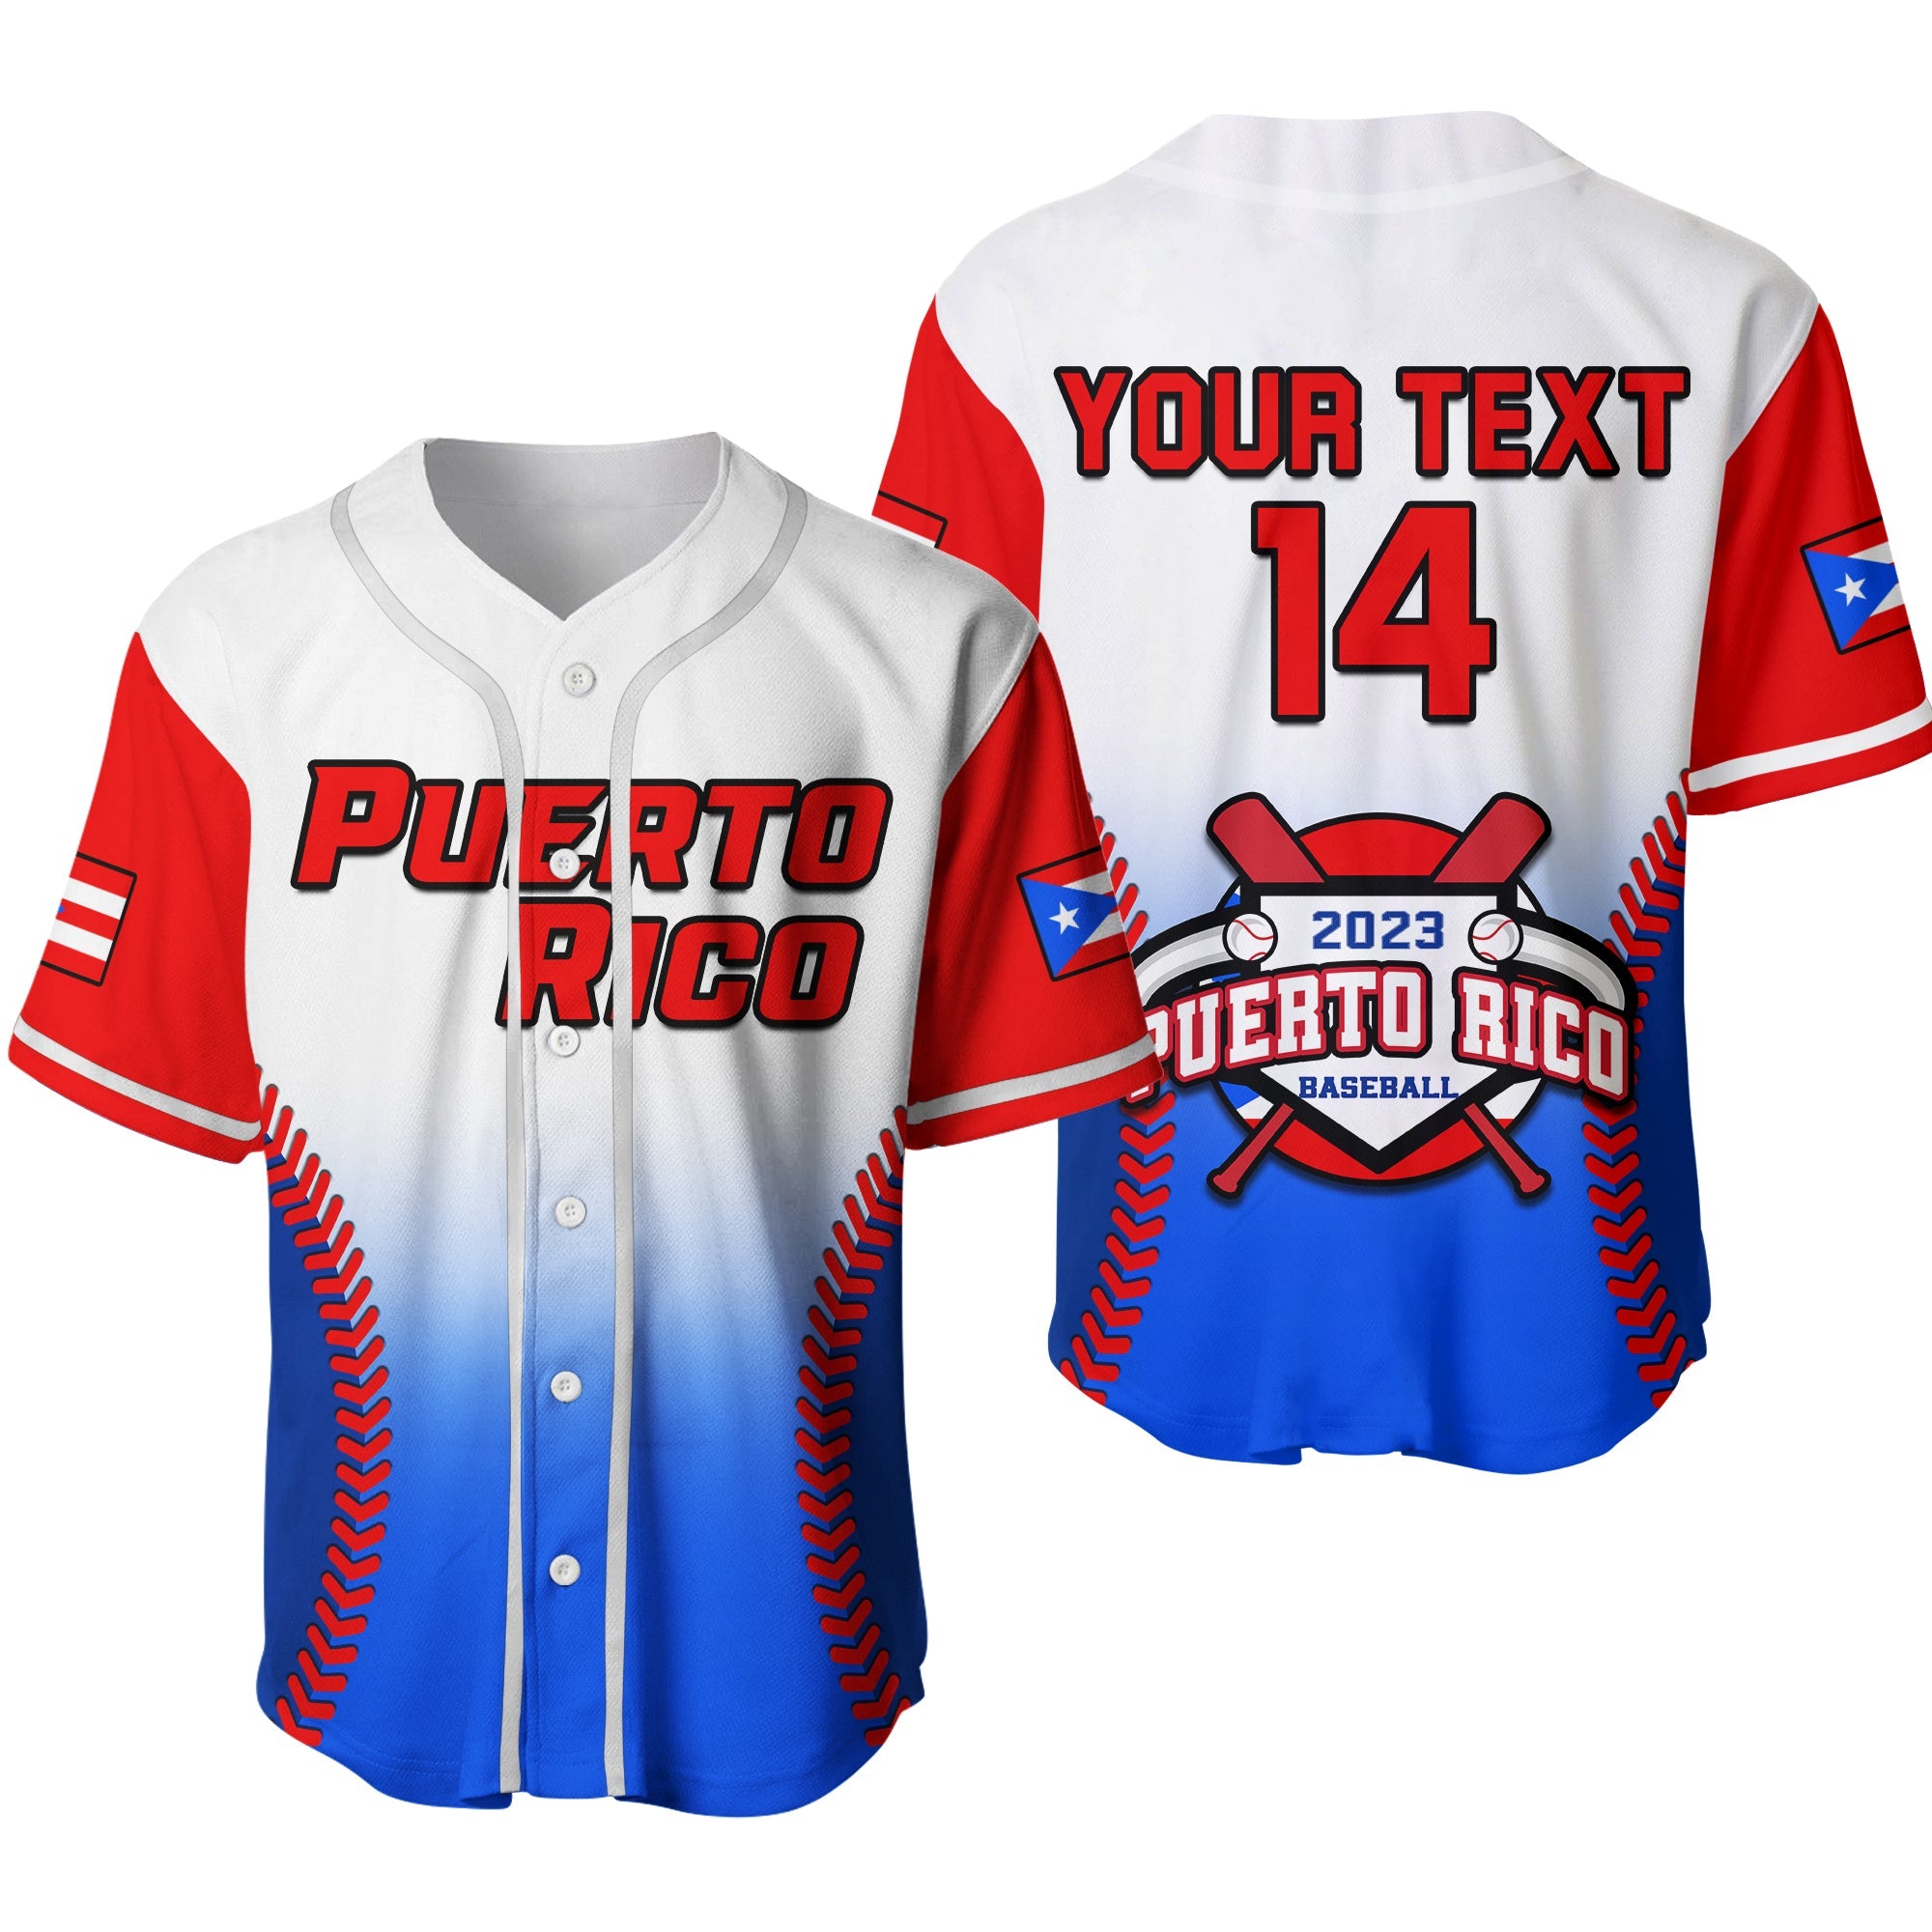 custom-text-and-number-puerto-rico-2023-baseball-jersey-baseball-classic-sporty-version-ver02